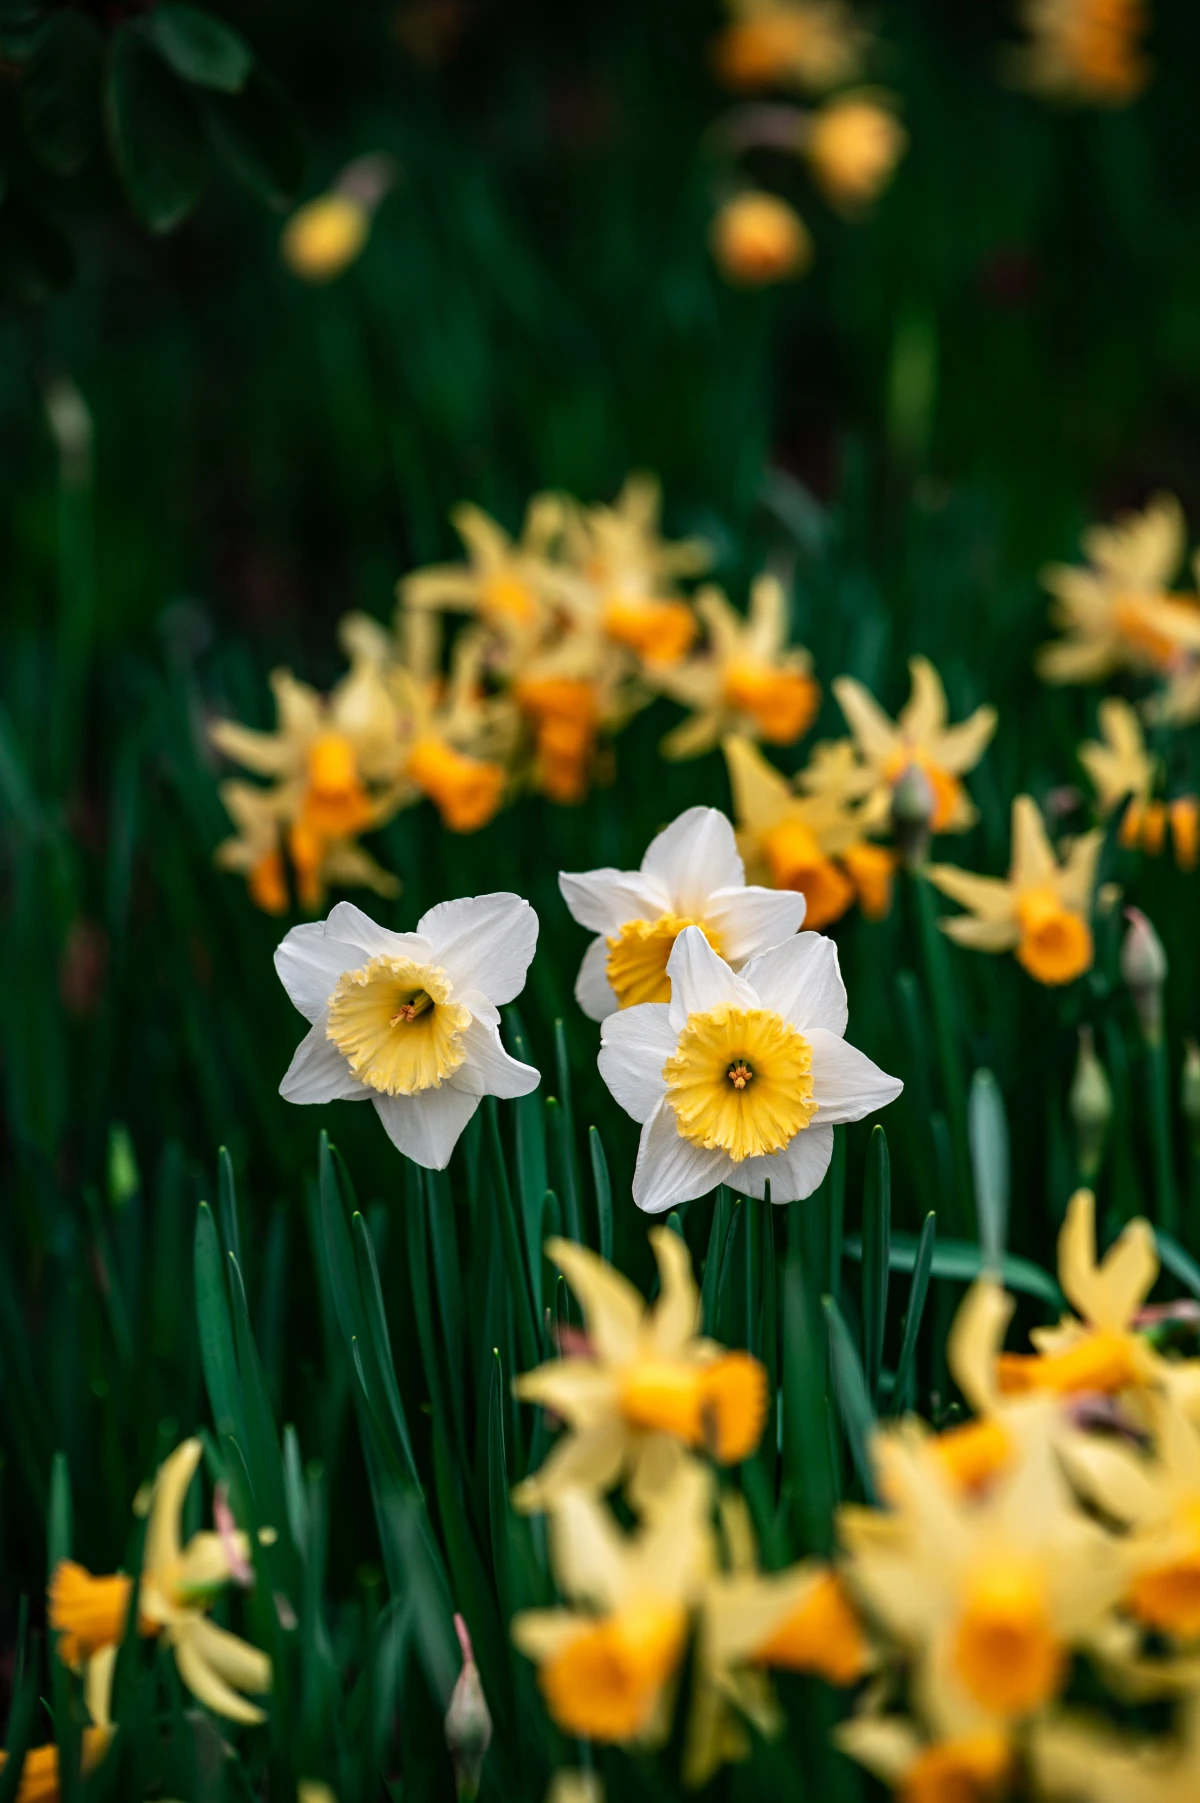 daffodils in different colors